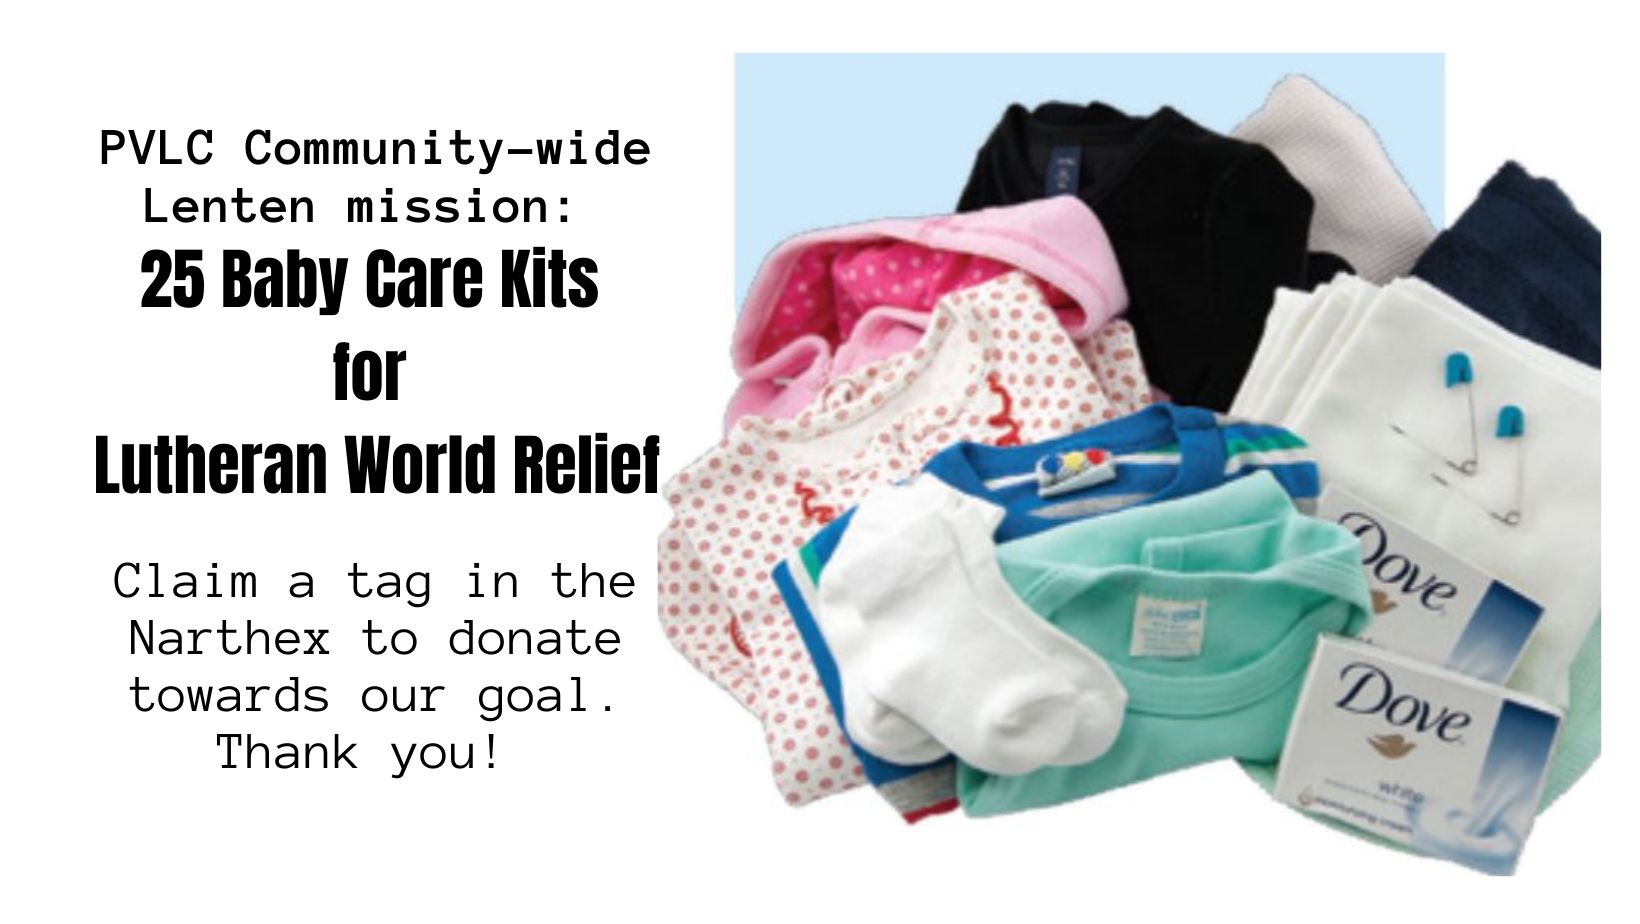 Get-ready...-Coming-up-this-Lent-we-will-once-again-be-collecting-donations-for-Lutheran-World-Relief.-This-time-for-Baby-Care-Kits-More-info-when-Lent-beings-1